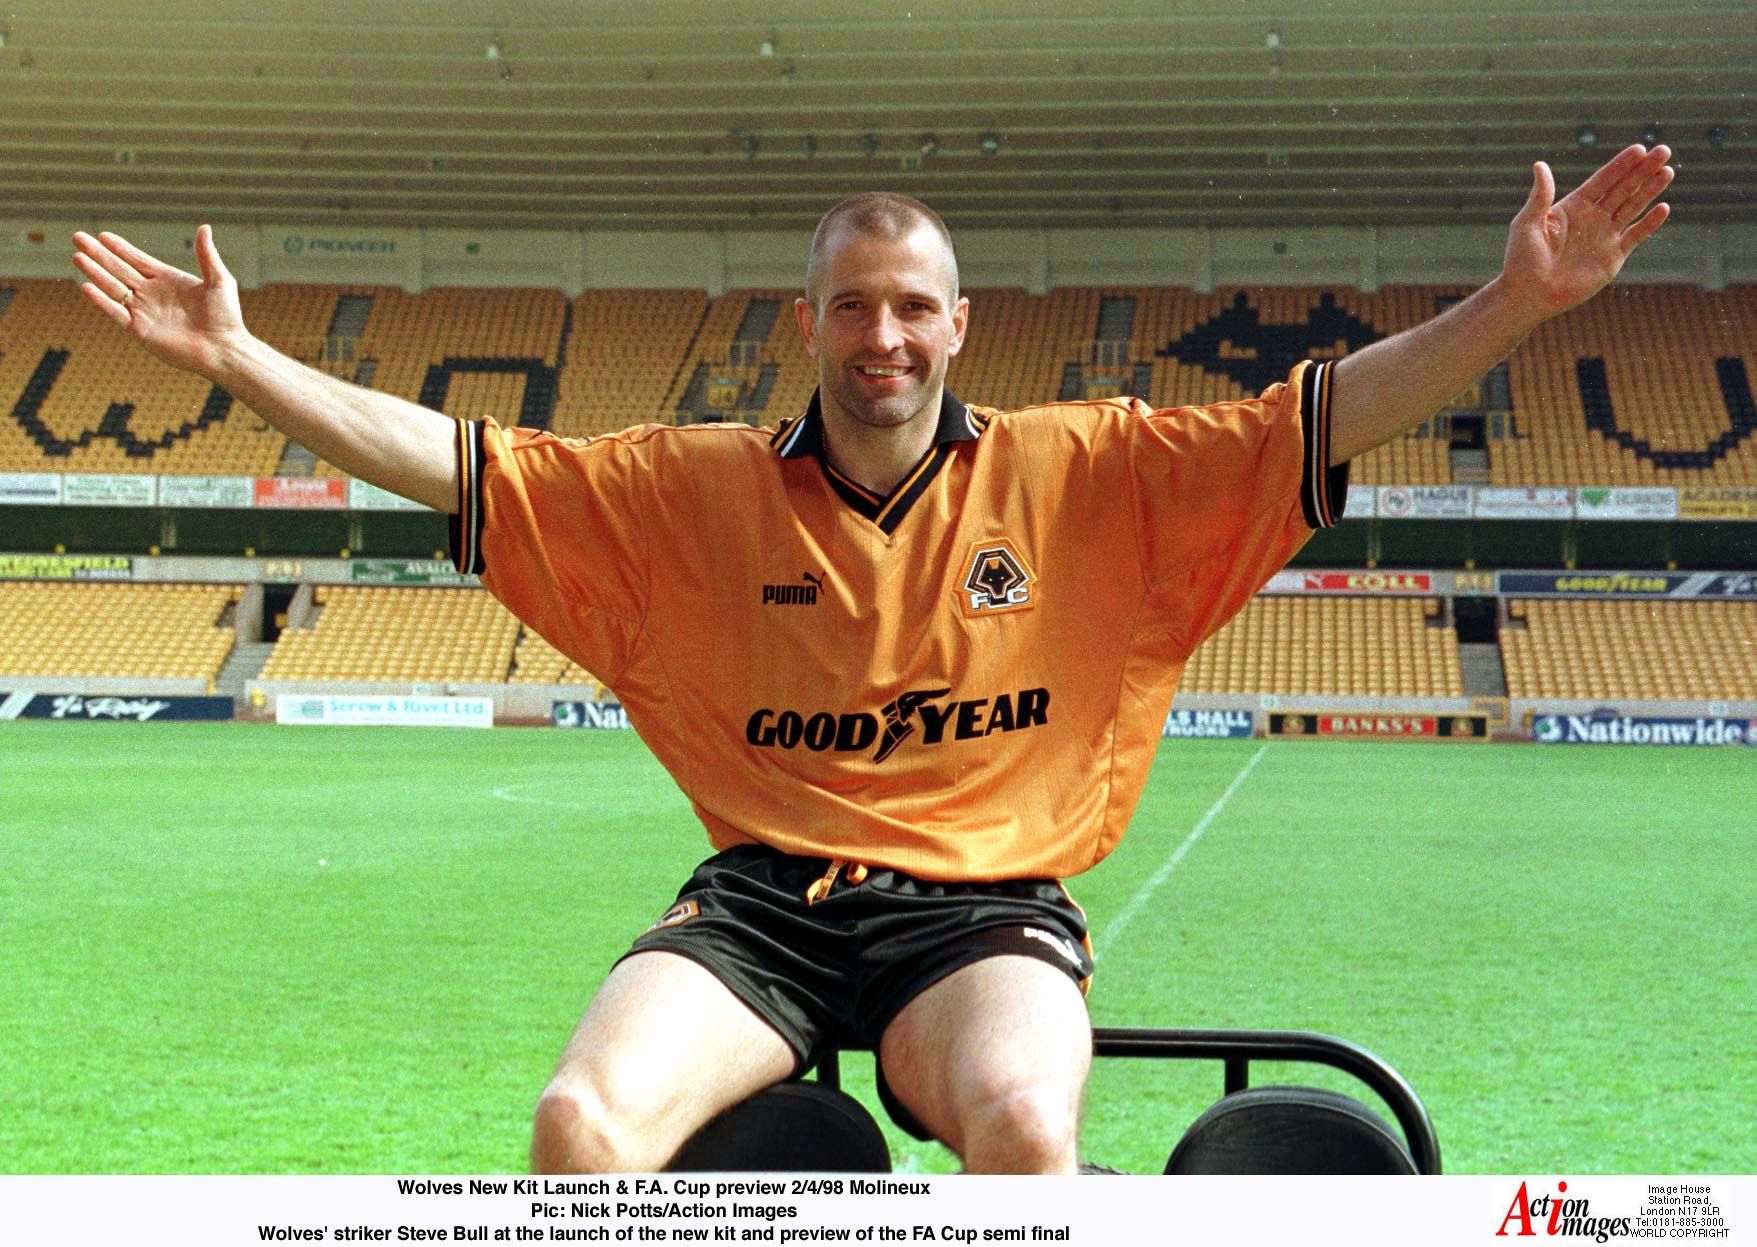 Wolves New Kit Launch &amp; FA Cup  preview 2/4/98 Molineux 
Pic: Nick Potts/Action Images 
Wolves' striker Steve Bull at the launch of the new kit and preview of the FA Cup semi final 
Wolverhampton Wanderers